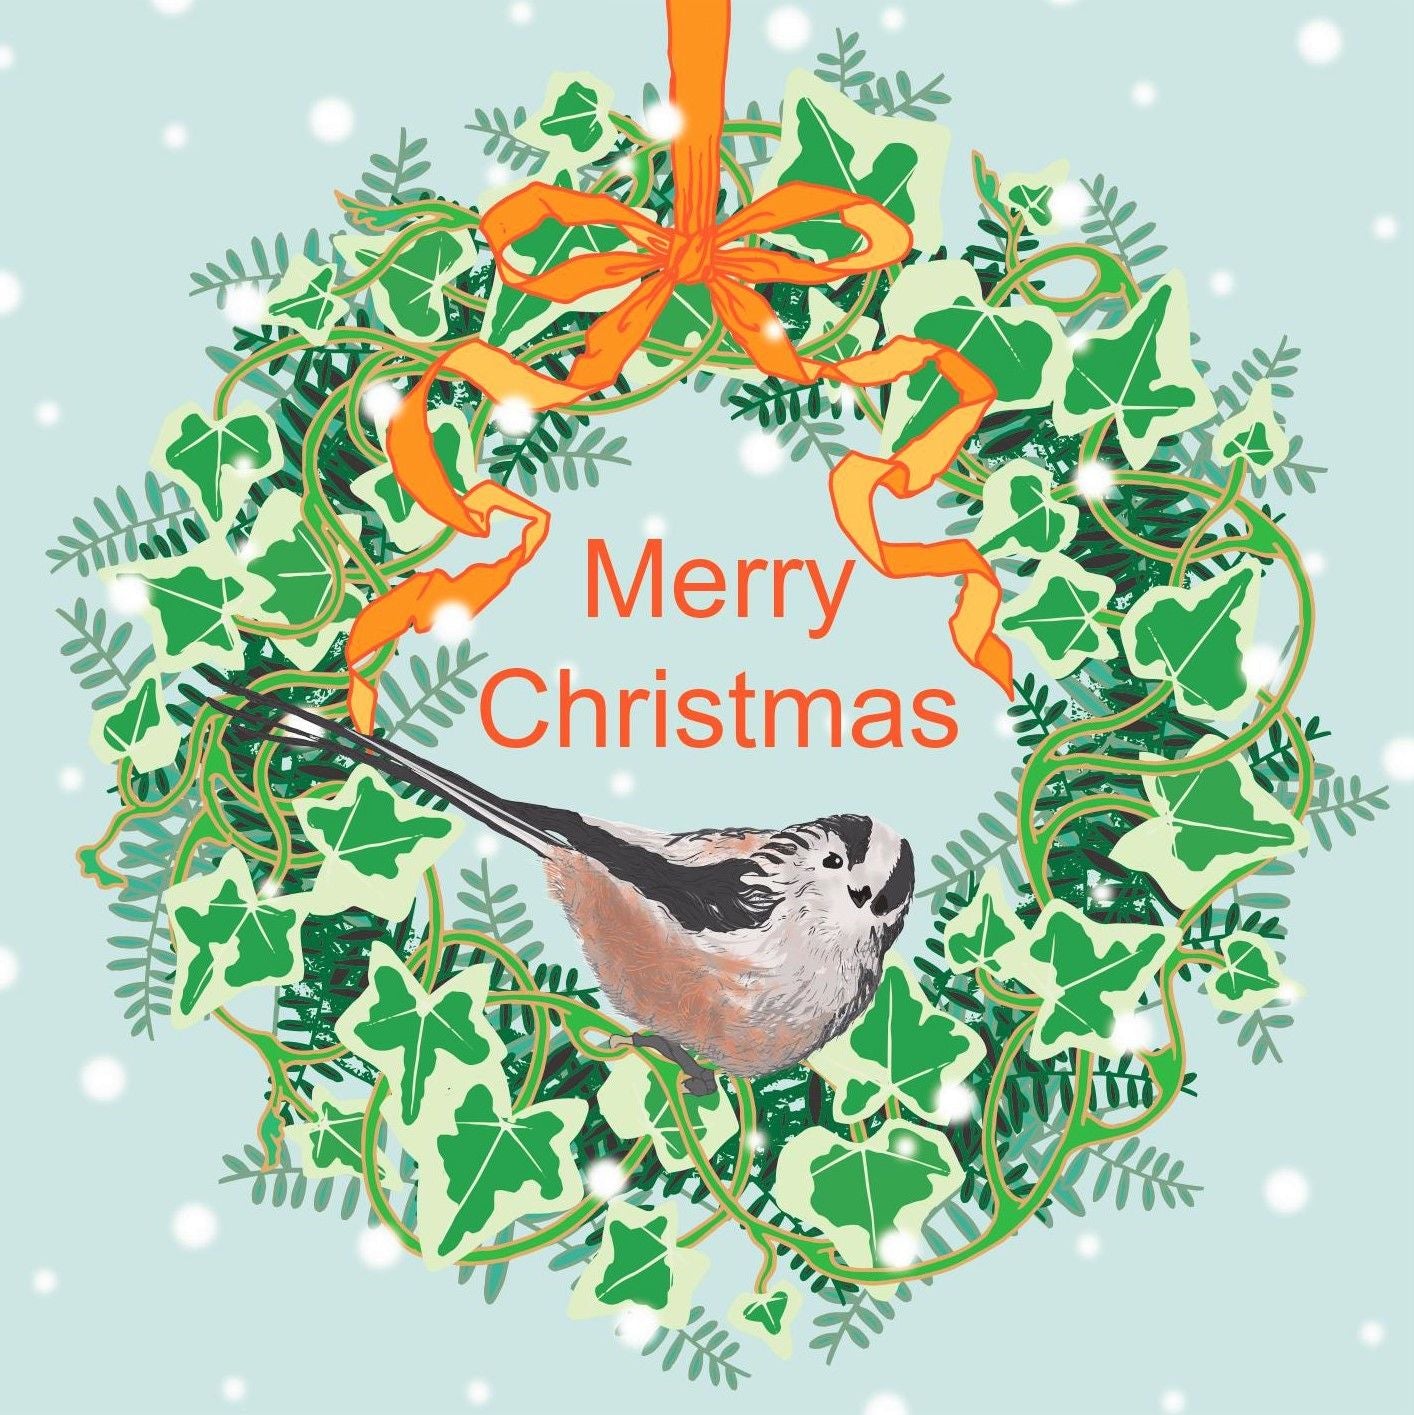 Ivy Wreath & Long-Tailed Tit Umbellifer Charity Christmas Card